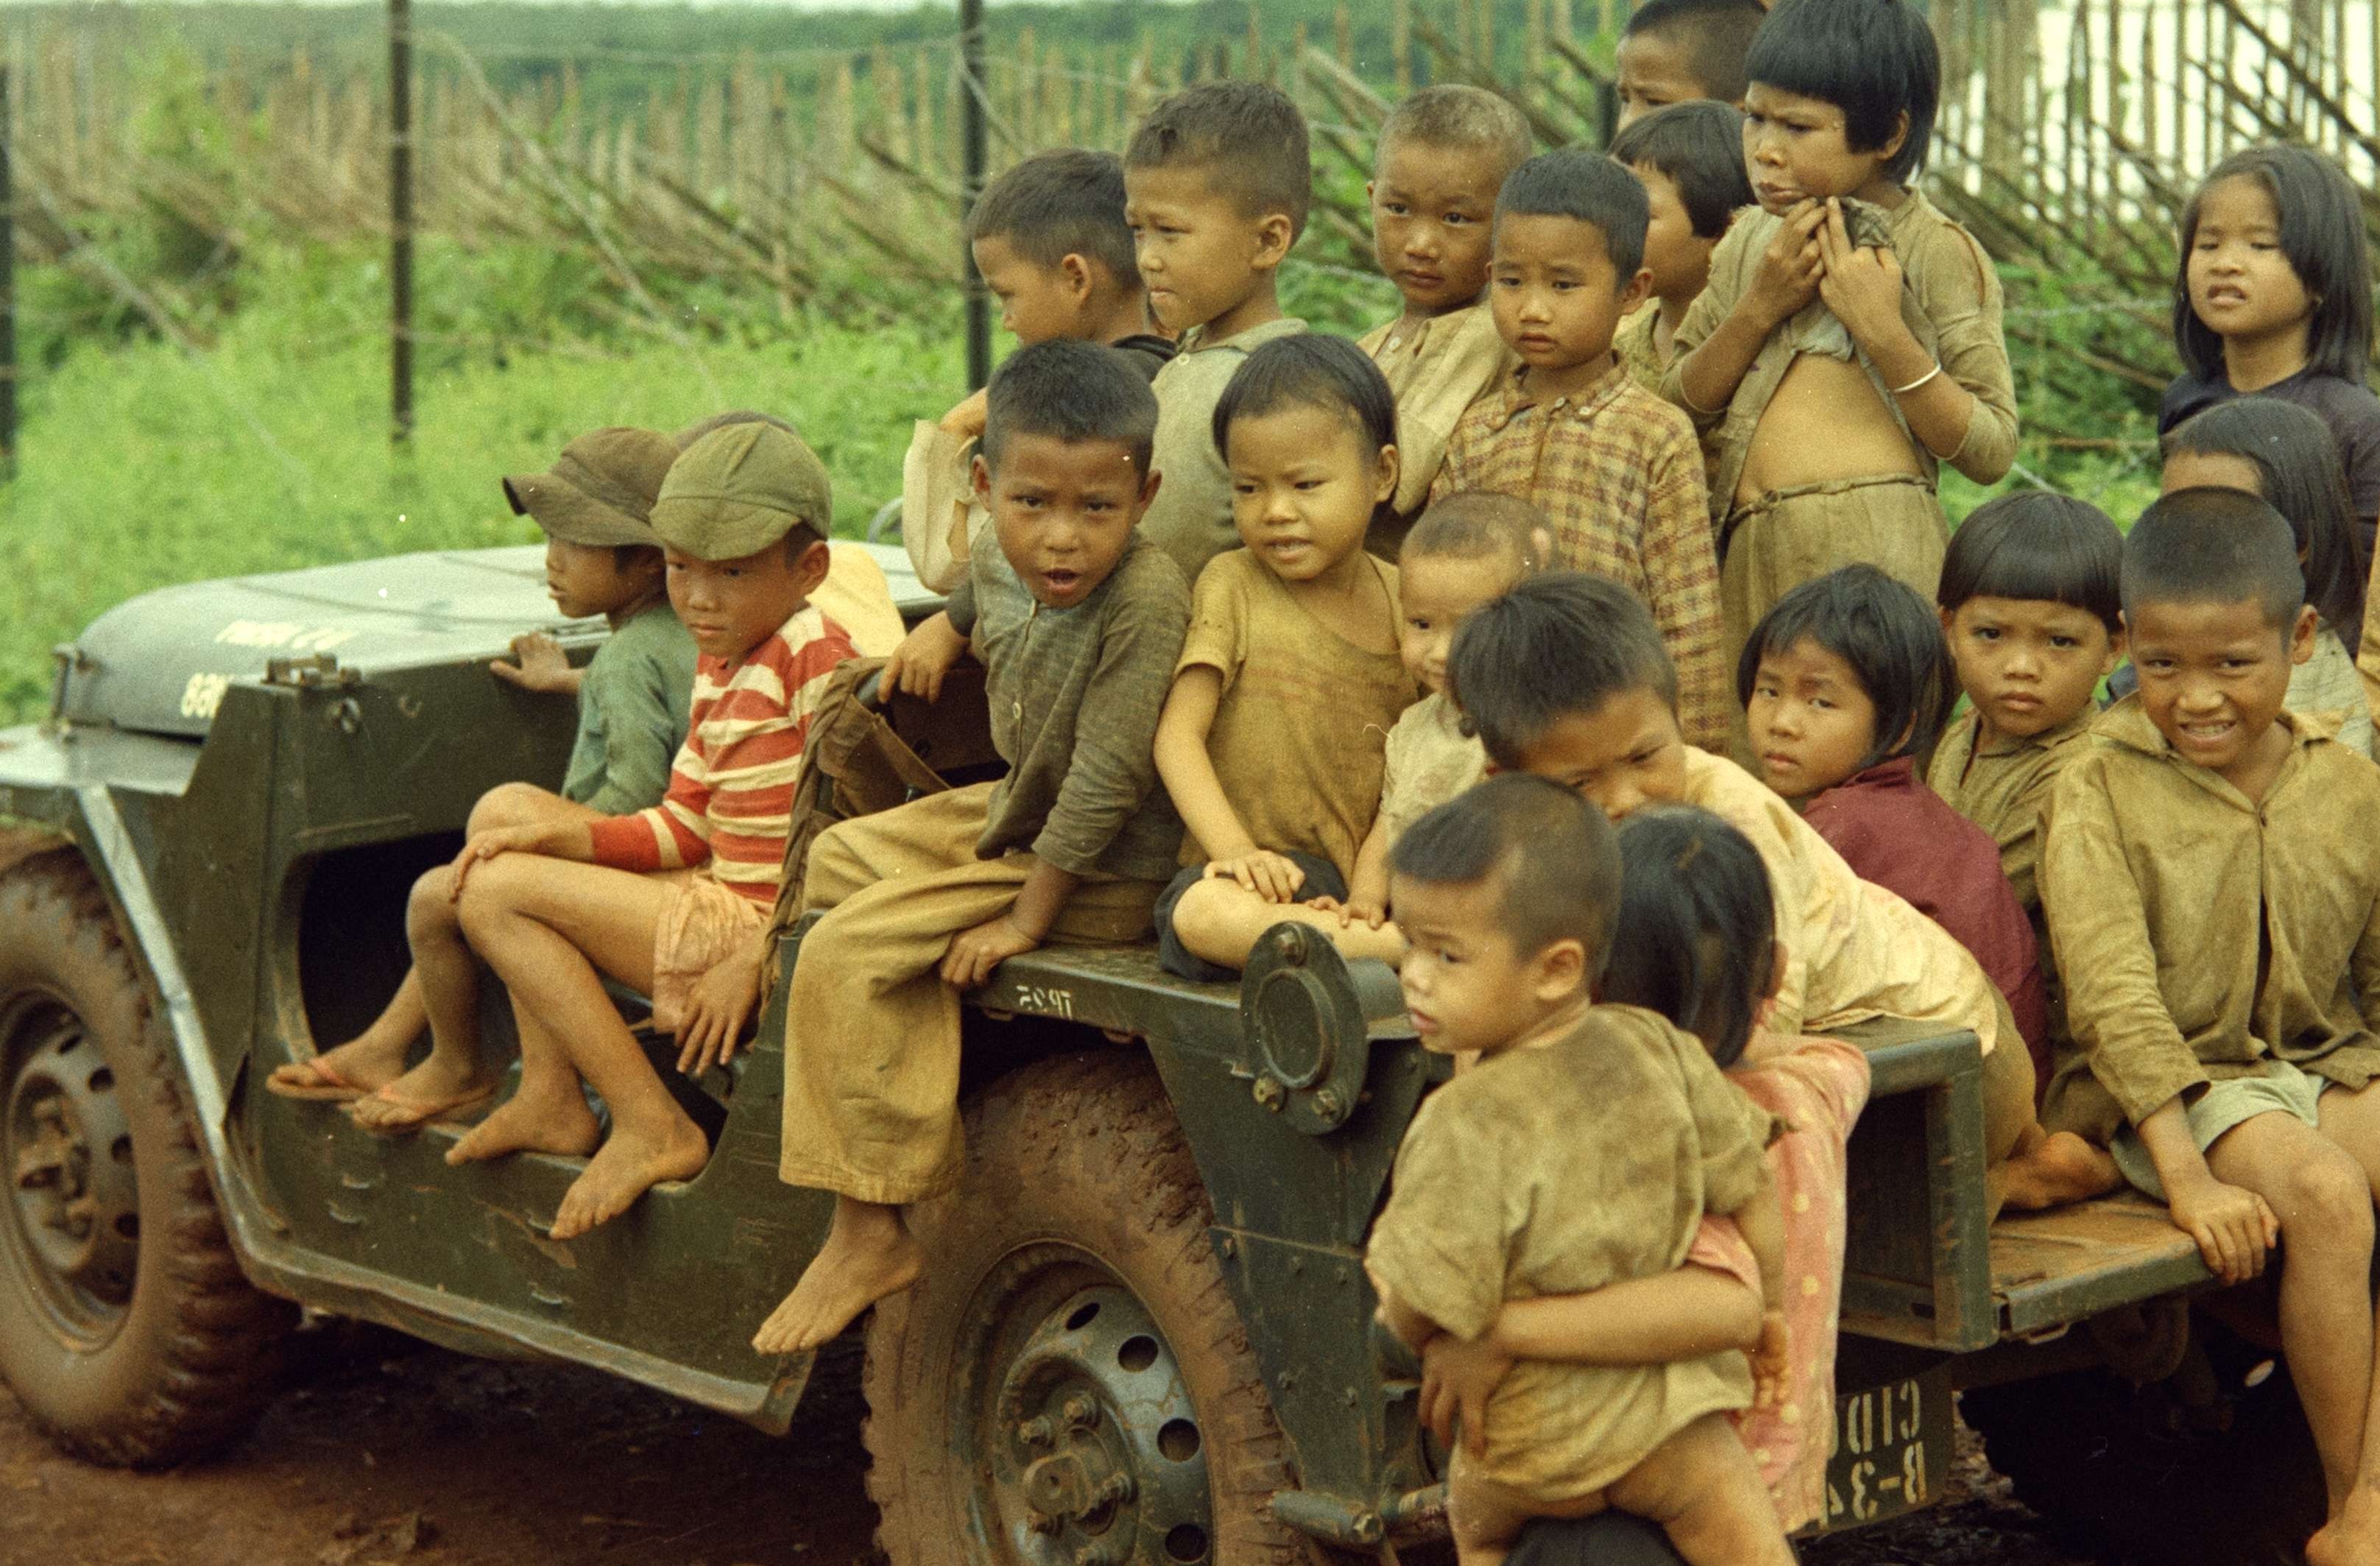 Photograph of Children Sitting in a Special Forces Jeep